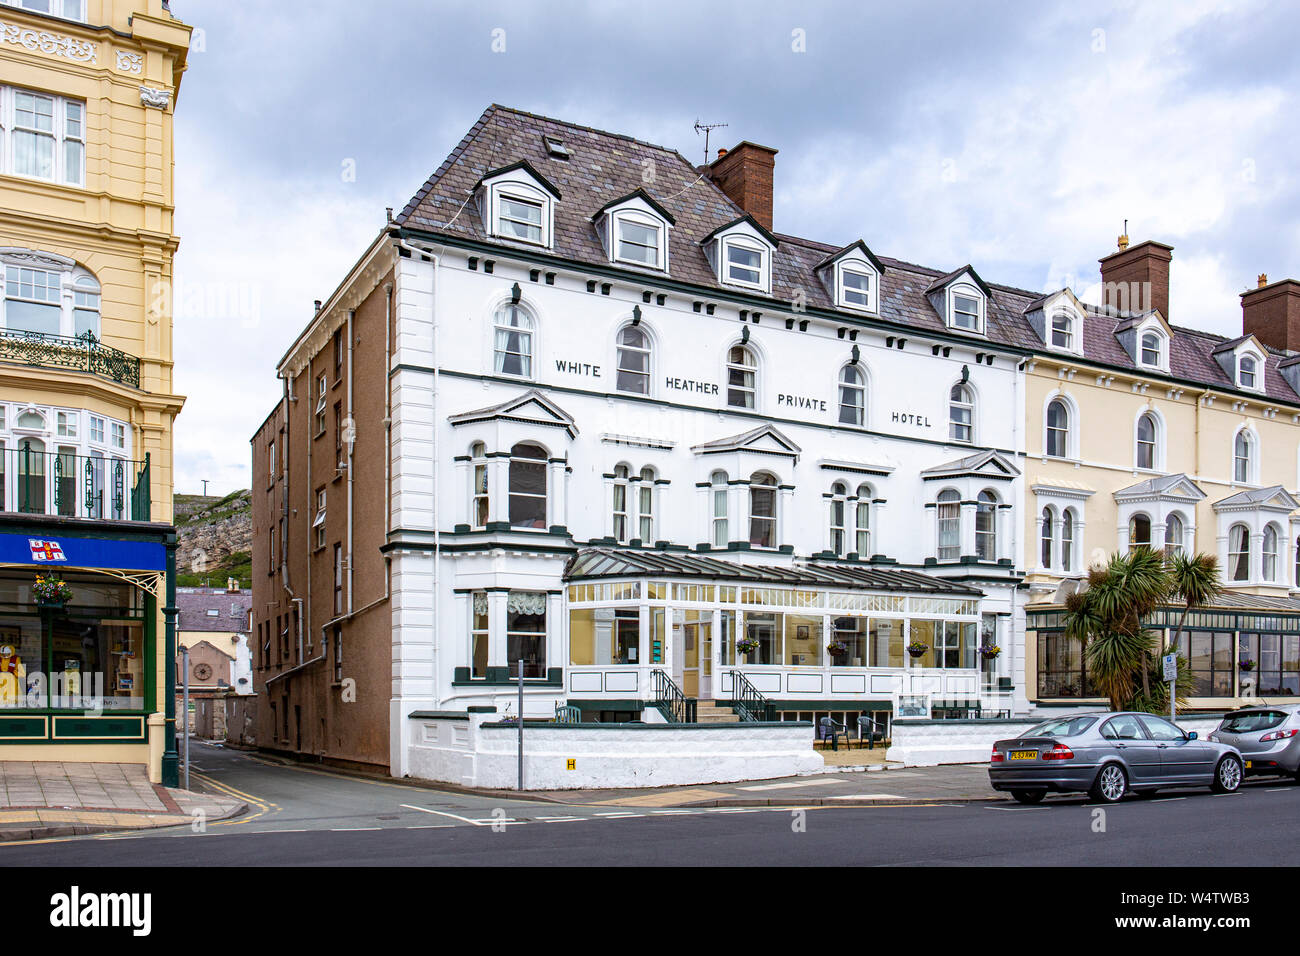 White Heather Private Hotel in the town centre of Llandudno Conwy North Wales UK Stock Photo